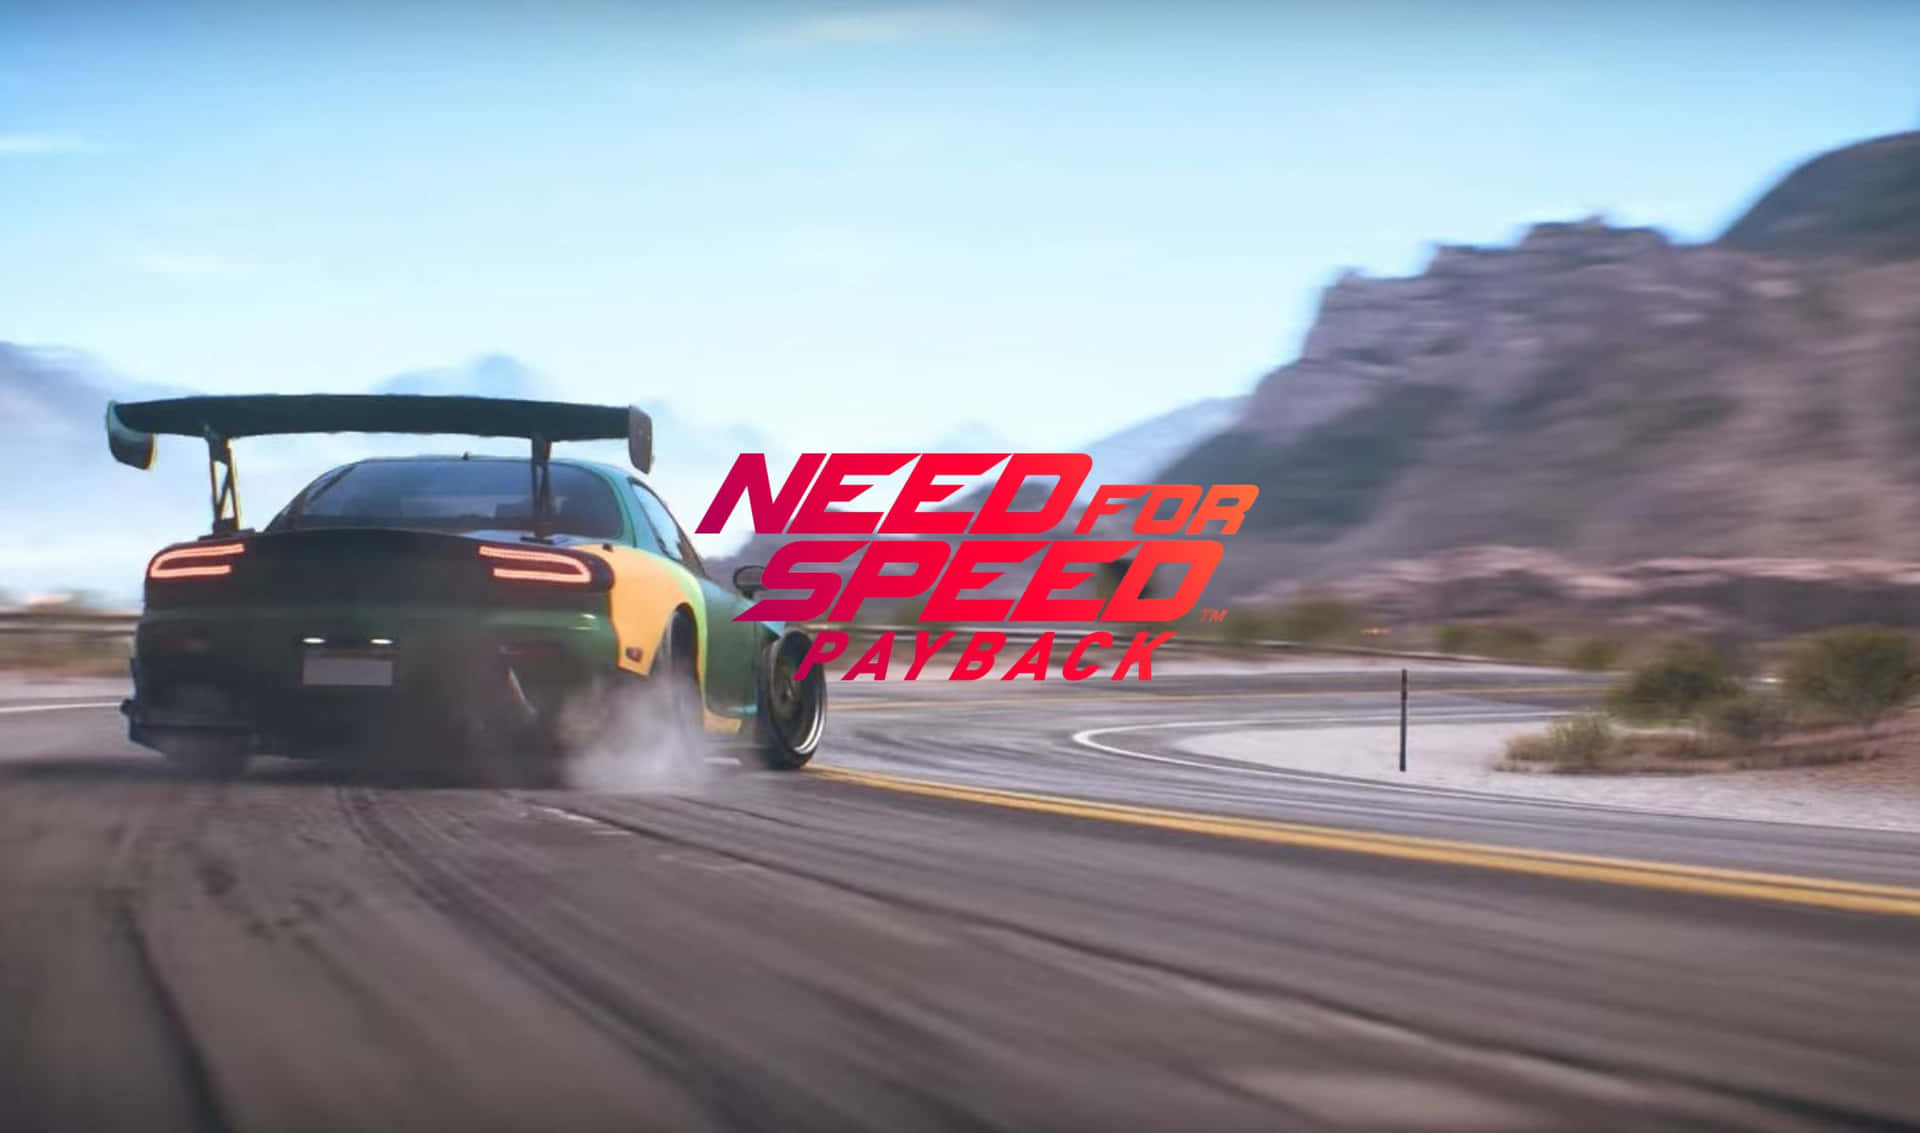 Image  2440x1440 image of the Need For Speed Payback video game.